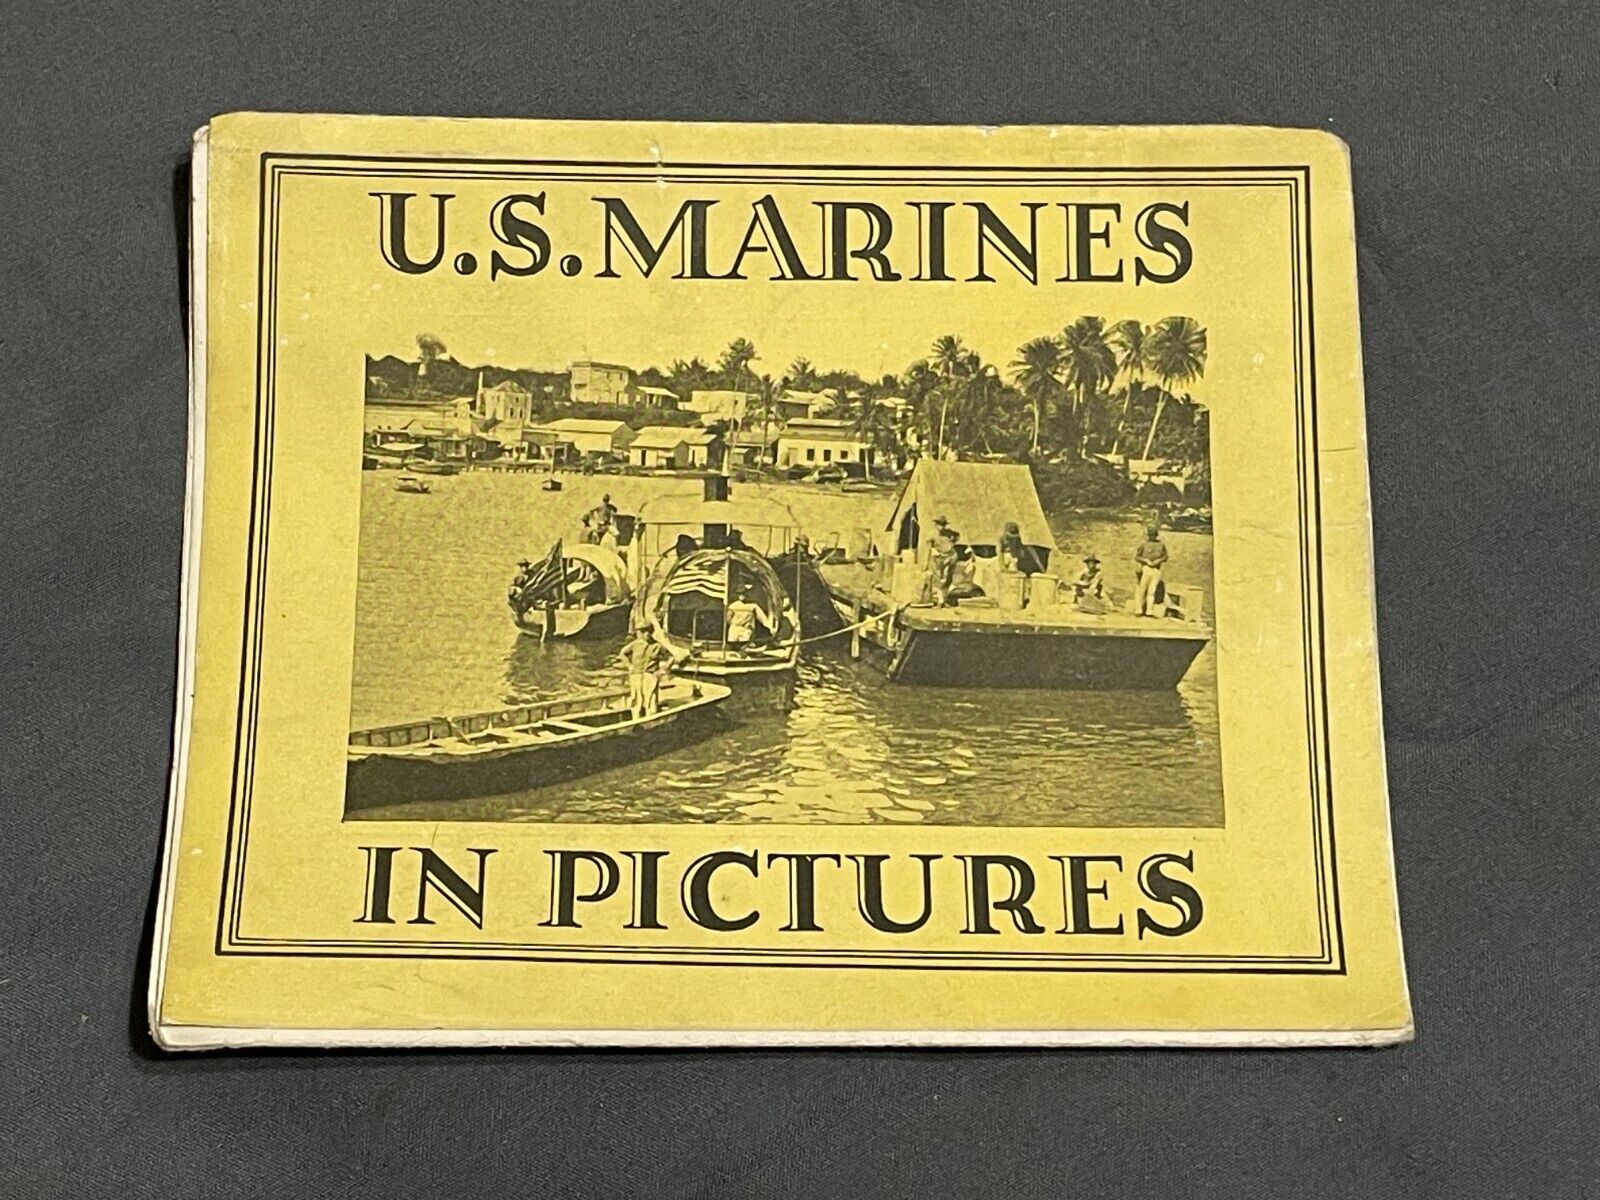 RARE 1922 U.S. MARINES IN PICTURES fold out BOOK Land Sea Air